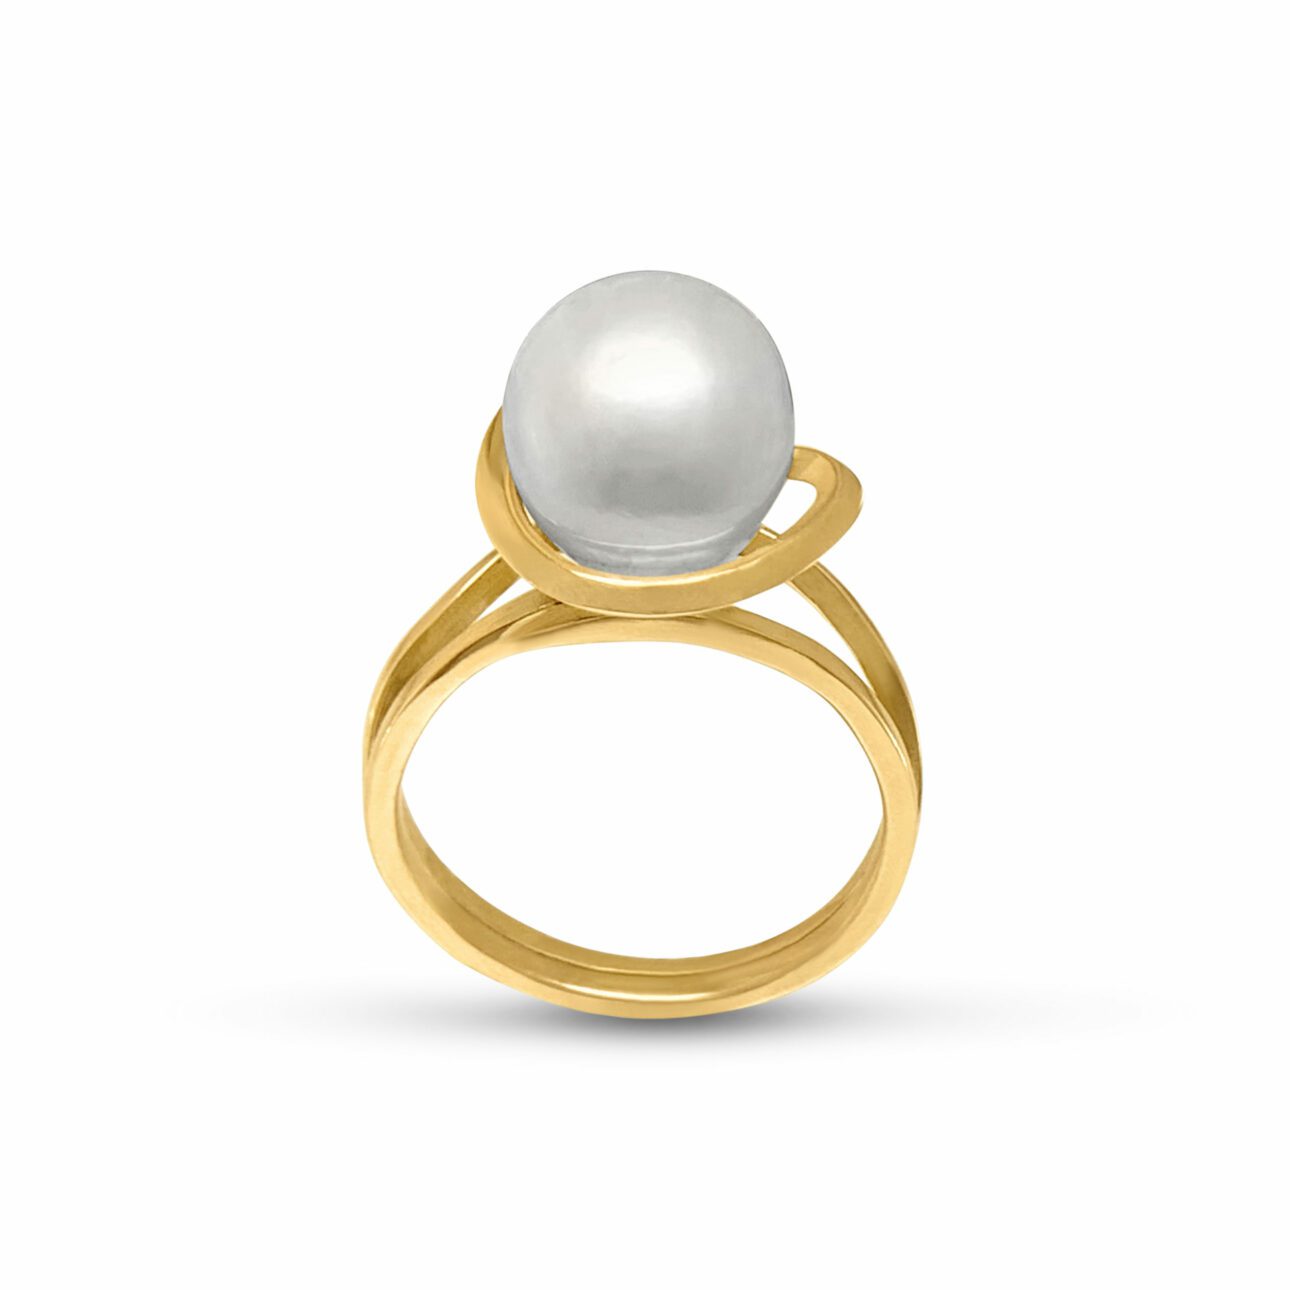 MoonPearl Ring in 18k Yellow Gold with Kasumiga Pearl | Dorothée Rosen ...